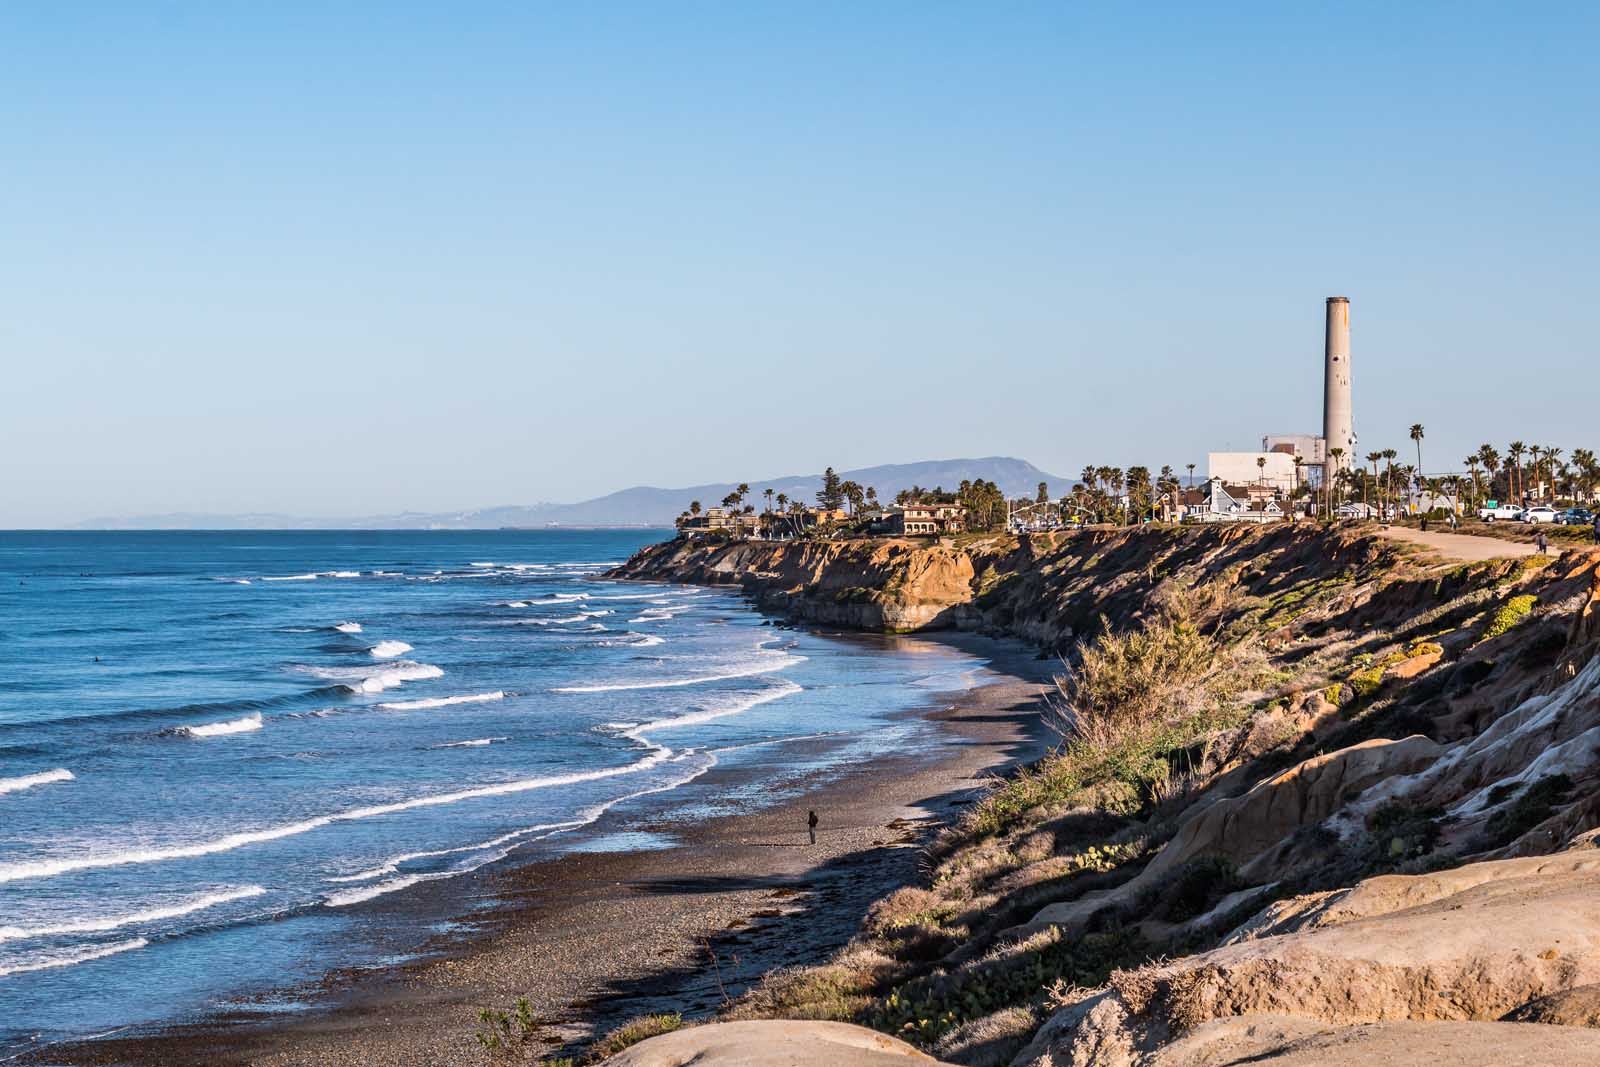 Where to Stay in Carlsbad San Diego